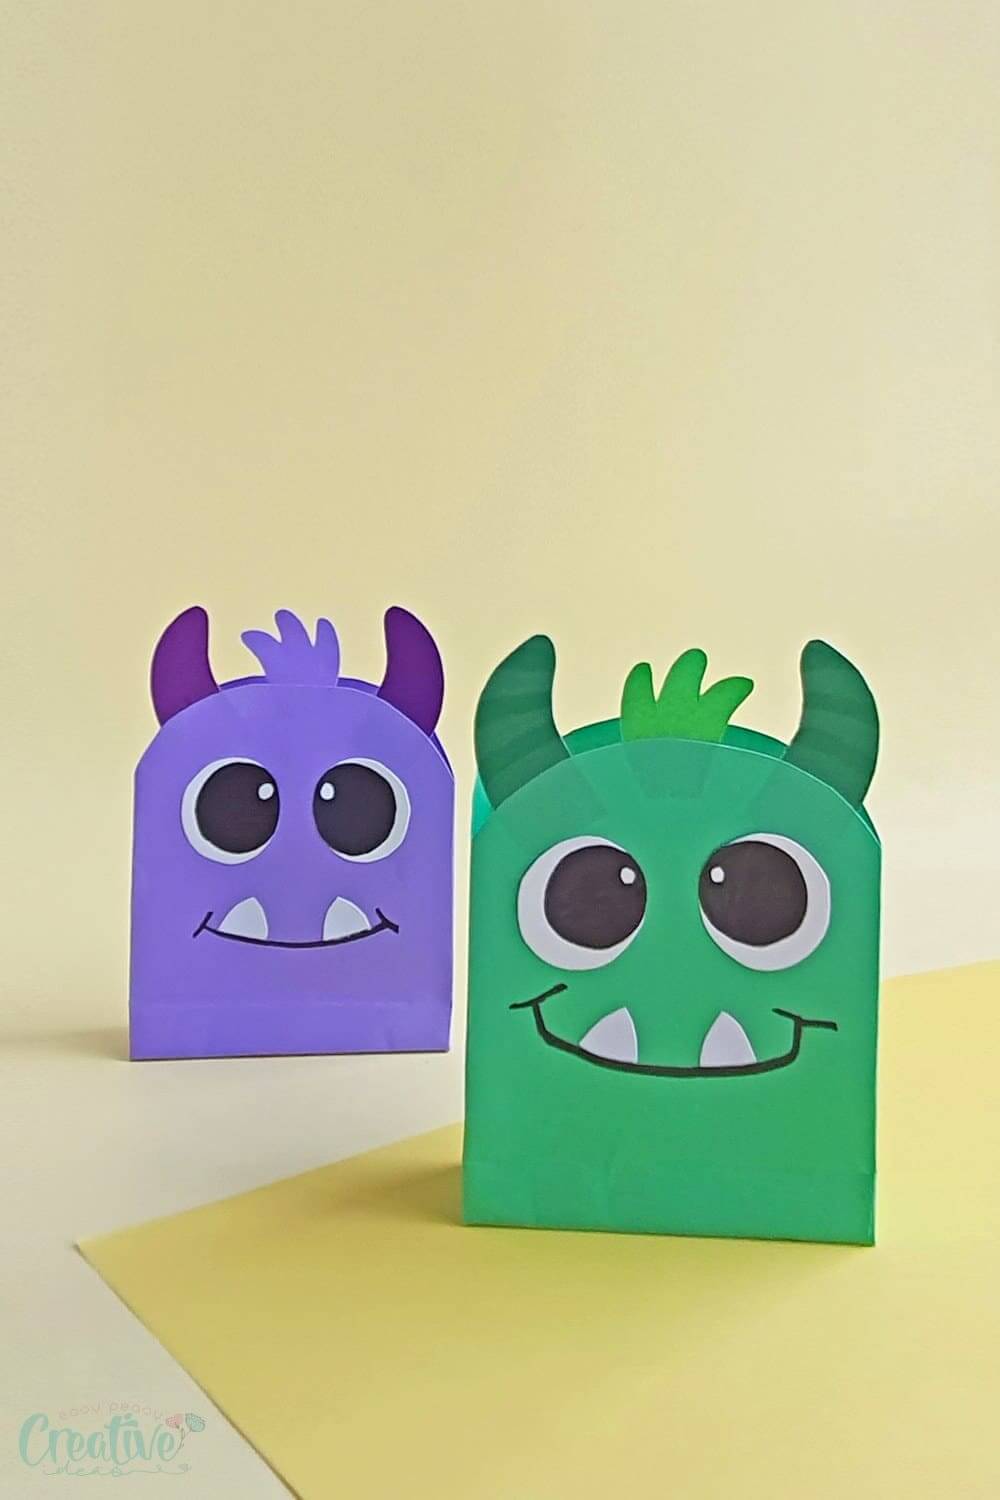 Pretty Halloween Monster Paper Bag Craft For Kids - Ideas for Making Art with Halloween Paper Bags